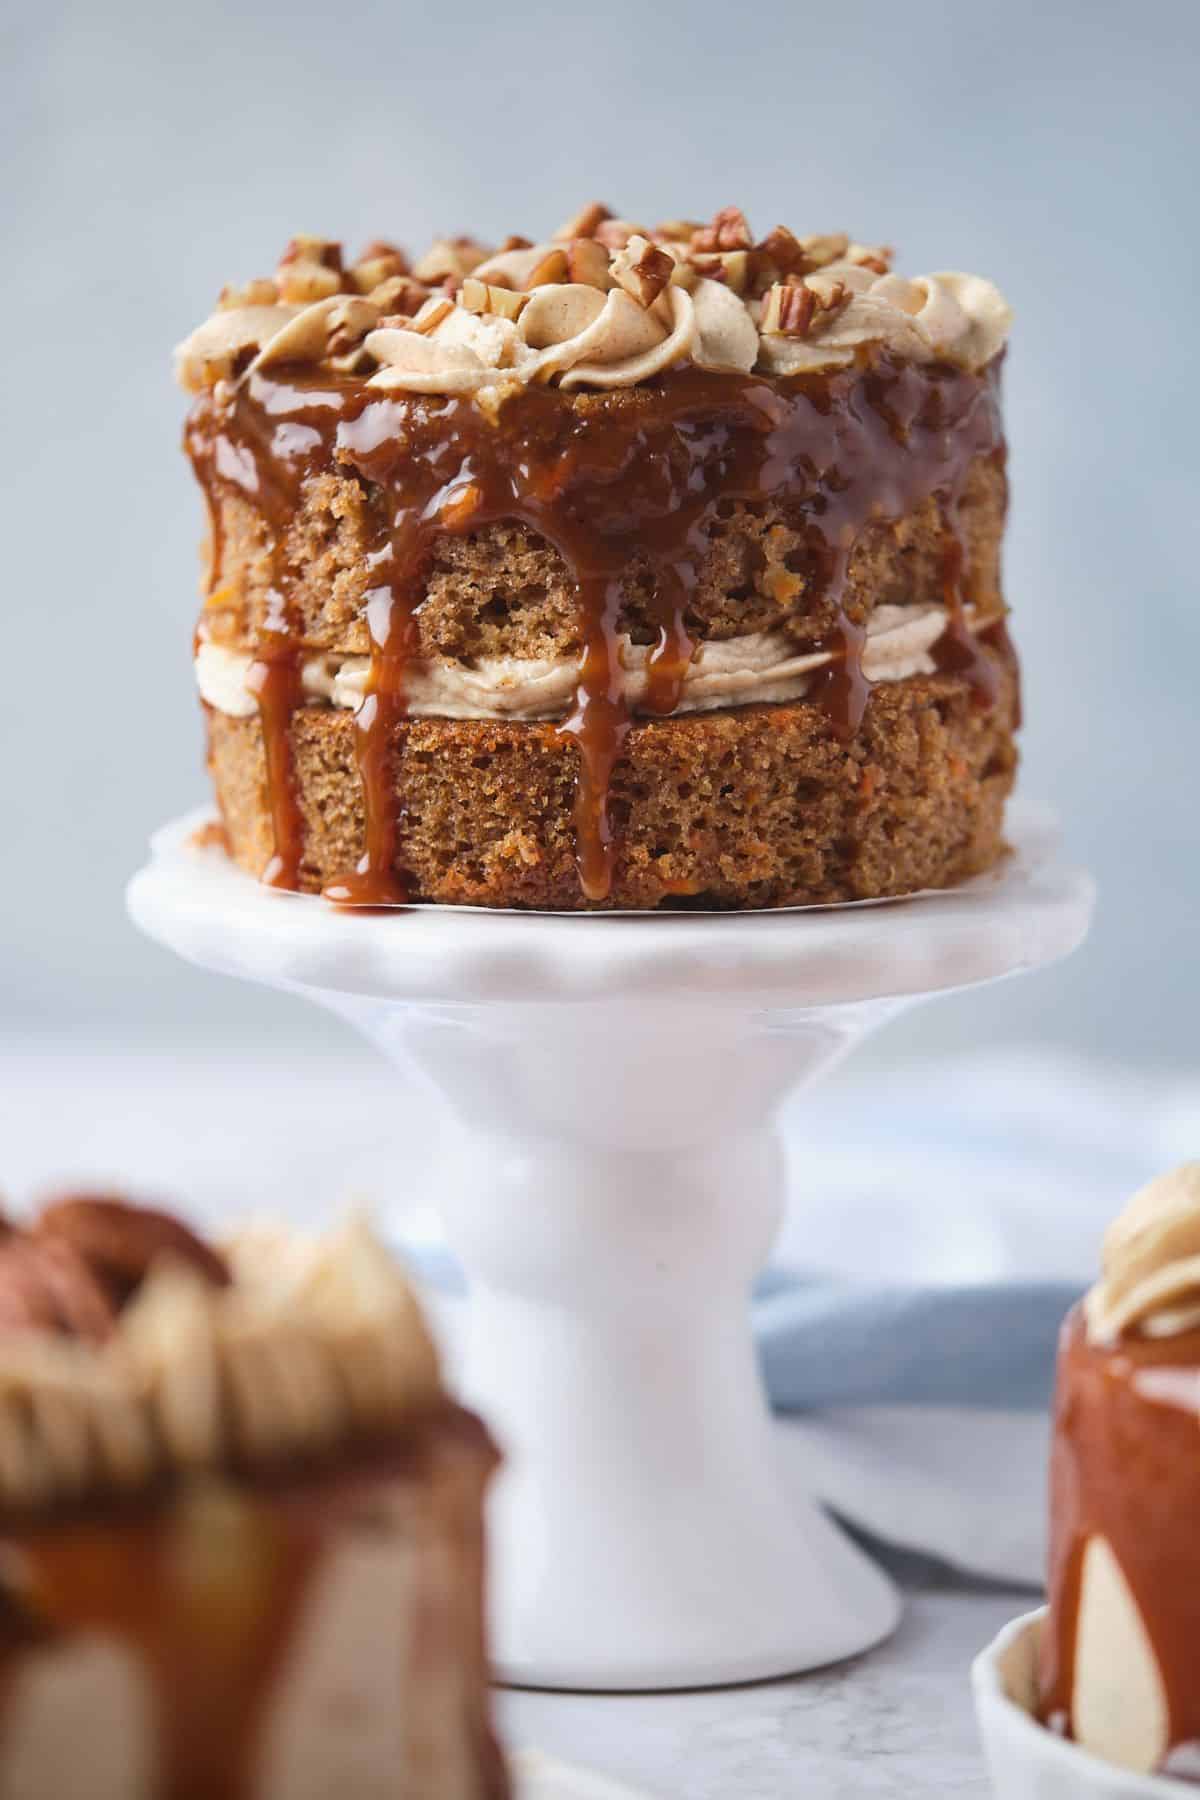 A closeup of a mini carrot cake with caramel drizzle, with two other mini carrot cakes nearby.